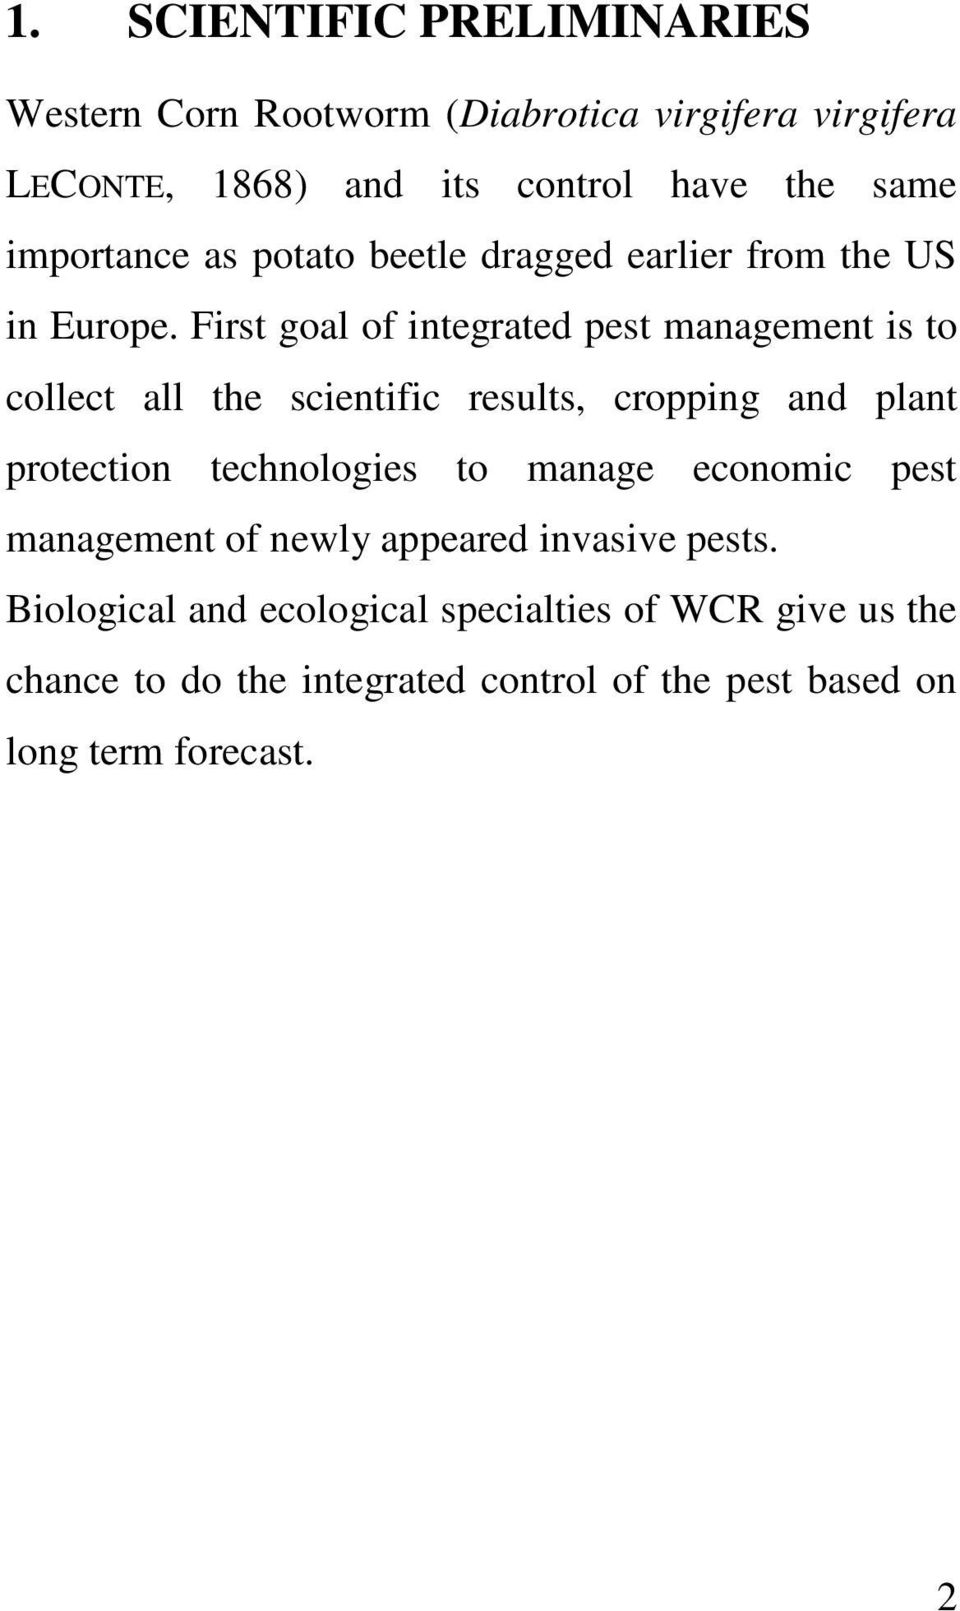 First goal of integrated pest management is to collect all the scientific results, cropping and plant protection technologies to